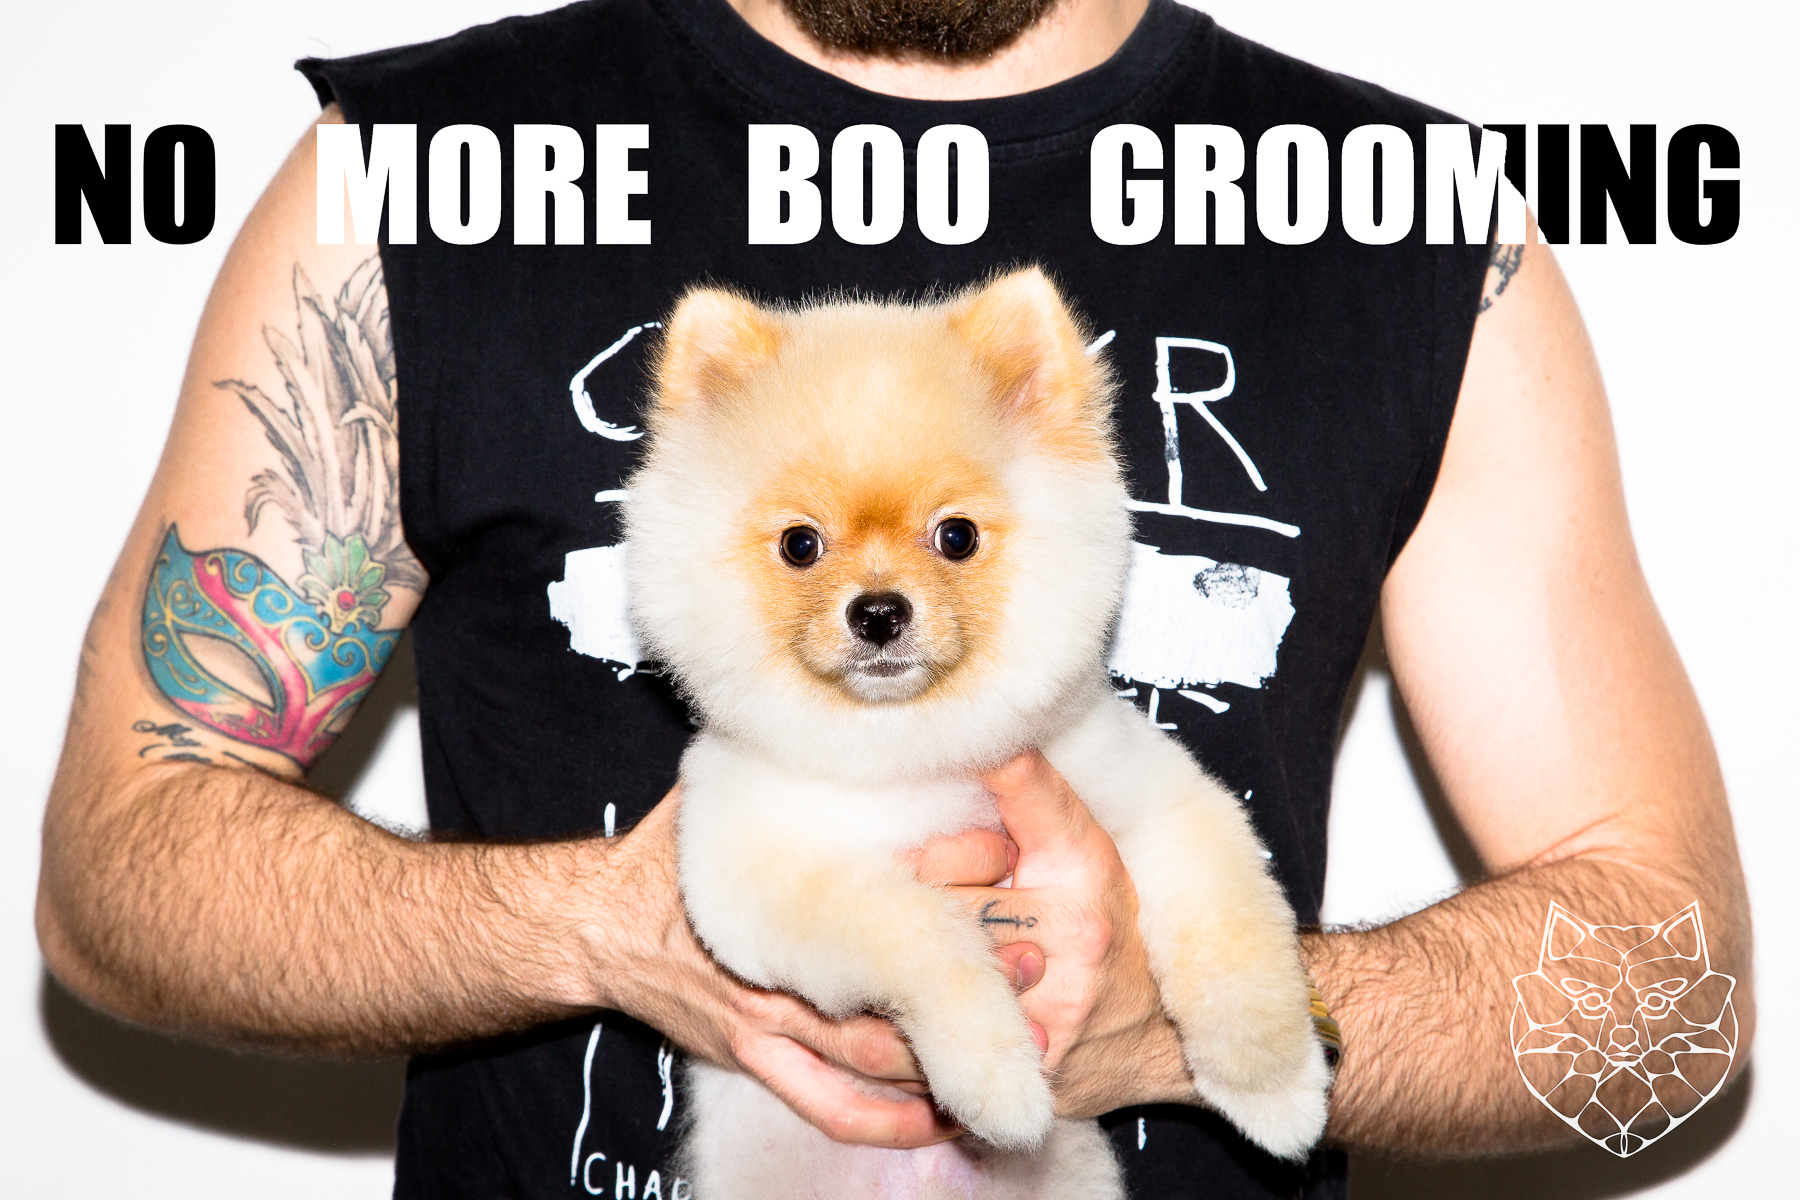 2015-09-22 No more boo grooming